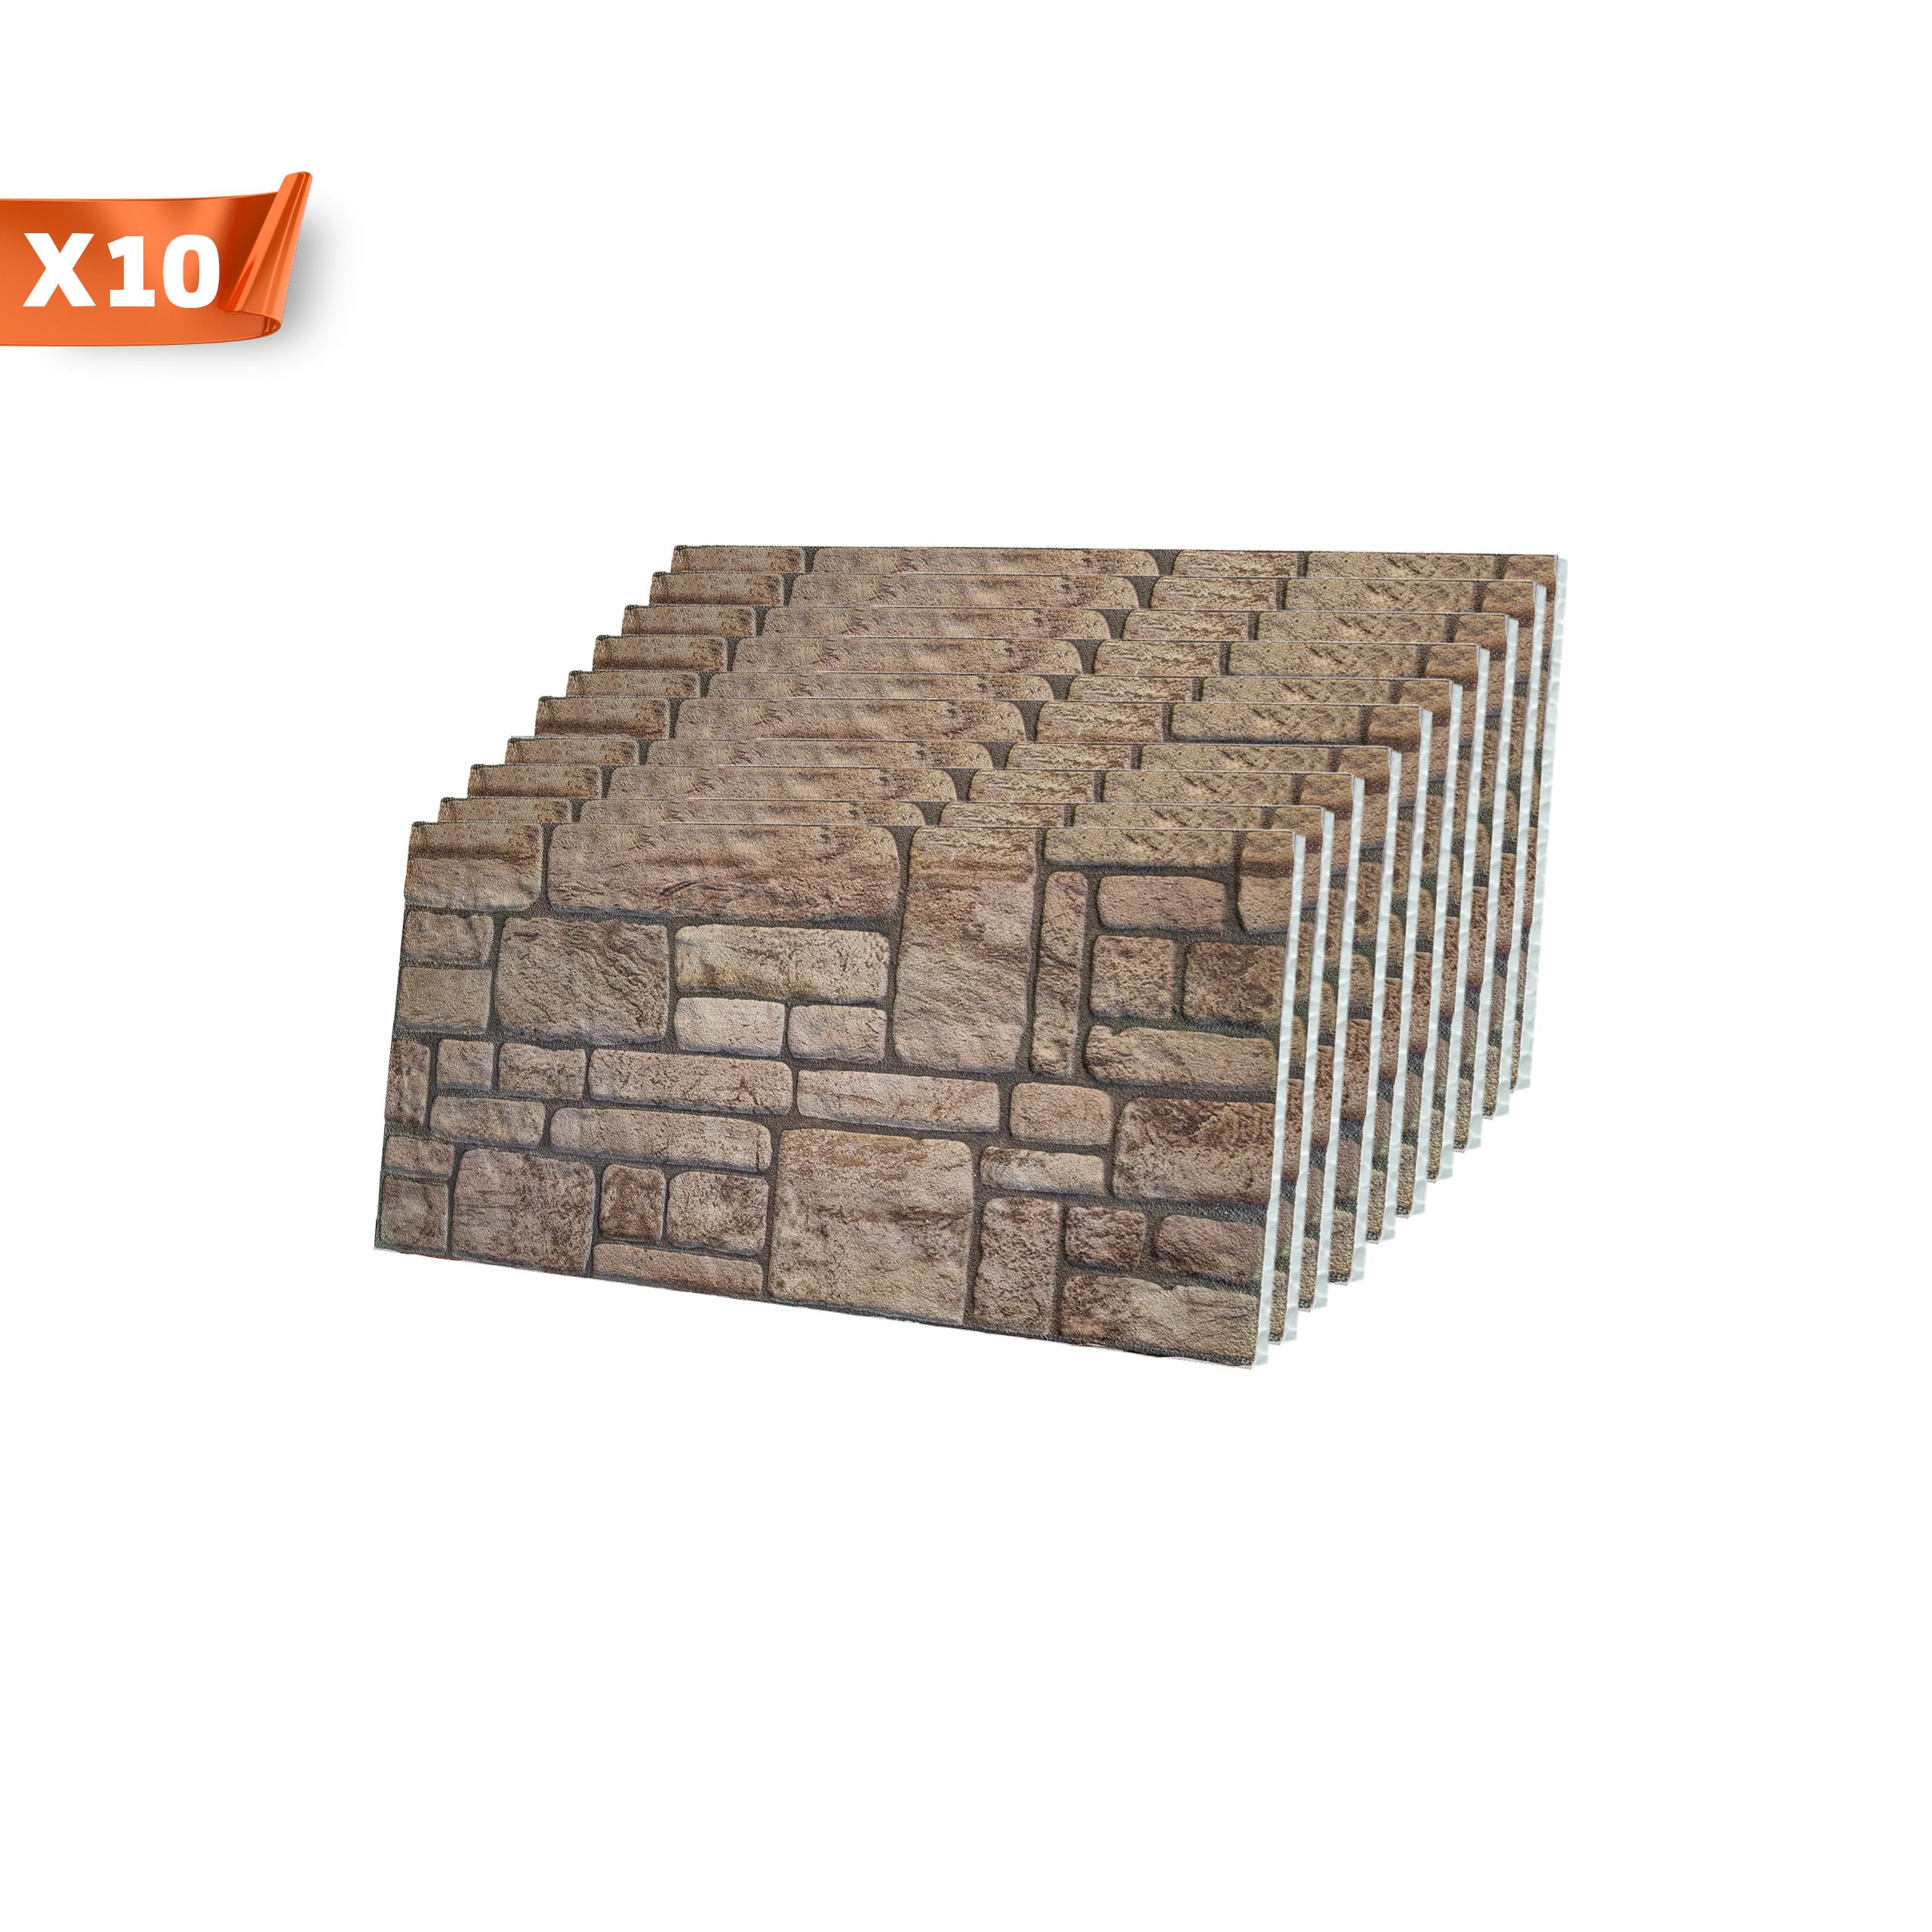 Ancient Traces K-03 3D Faux Mixed Wall Panels